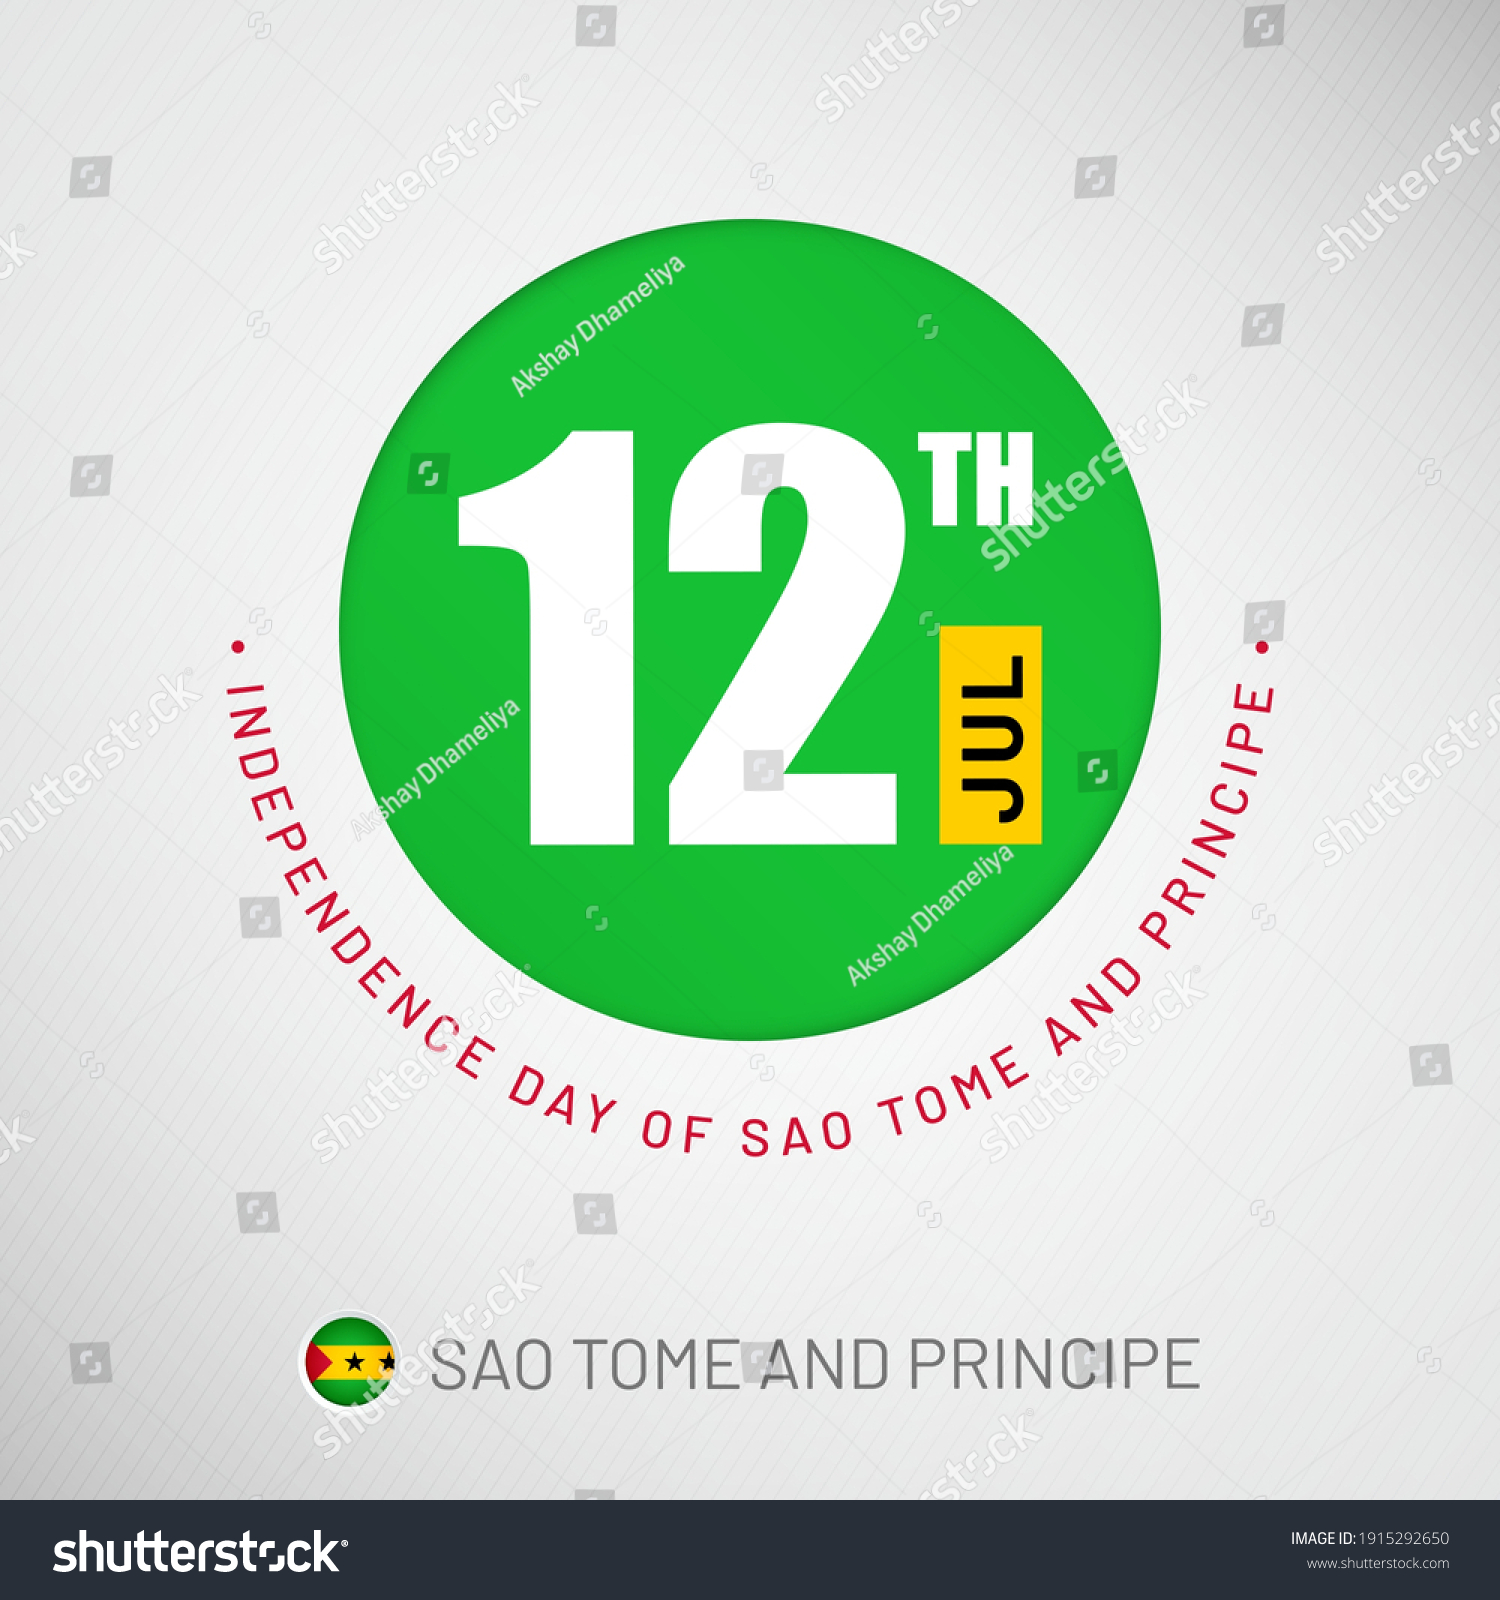 SVG of Independence day in Sao Tome and Principe celebration on 12th July, Artistic typographic background for social media website promotion svg